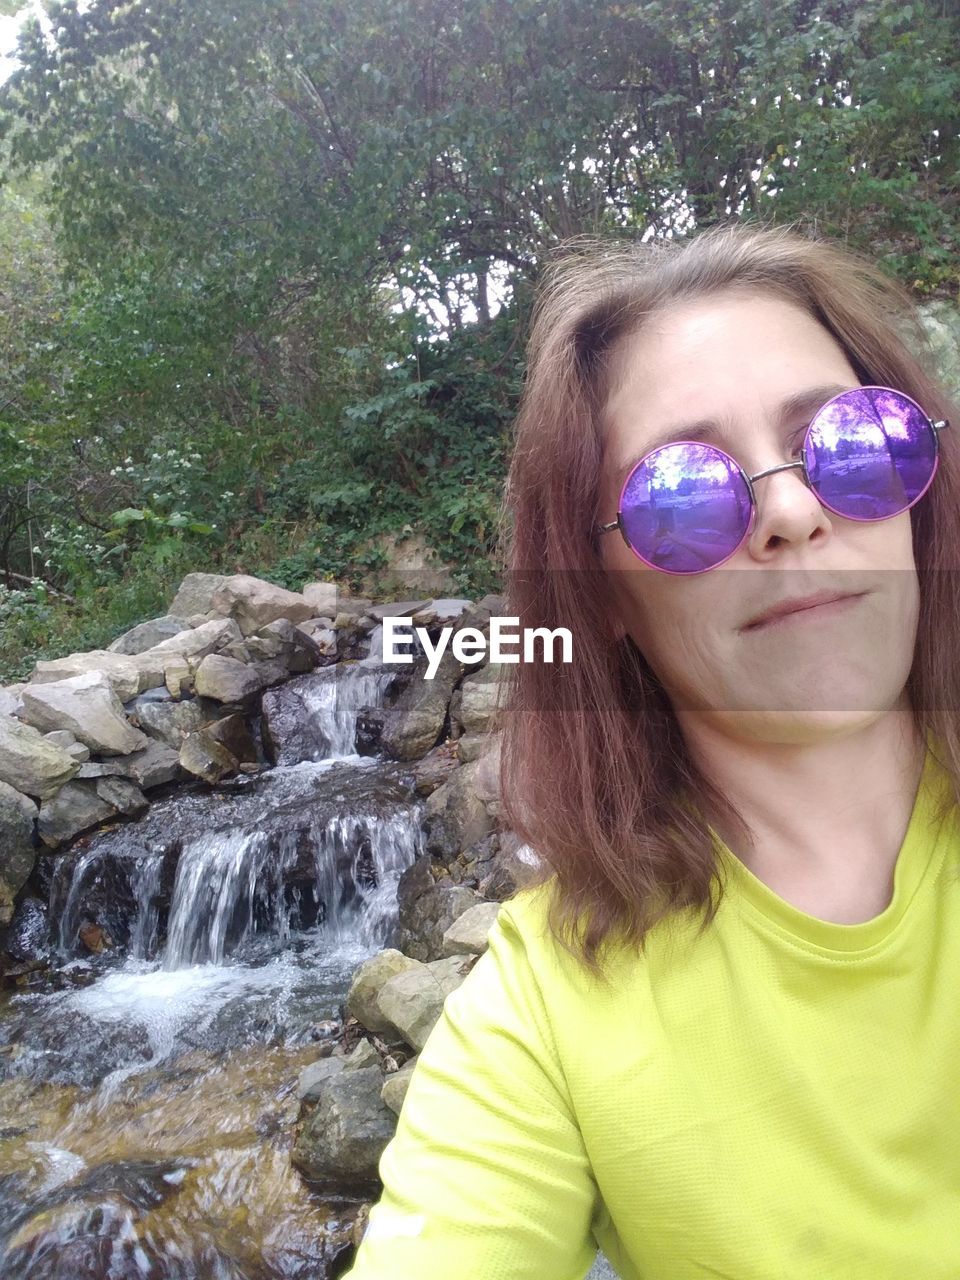 waterfall, one person, portrait, sunglasses, water, glasses, leisure activity, women, nature, front view, fashion, child, day, lifestyles, looking at camera, plant, childhood, rock, human face, headshot, female, smiling, outdoors, tree, hairstyle, casual clothing, beauty in nature, long hair, vacation, clothing, spring, person, young adult, standing, green, land, adult, goggles, forest, happiness